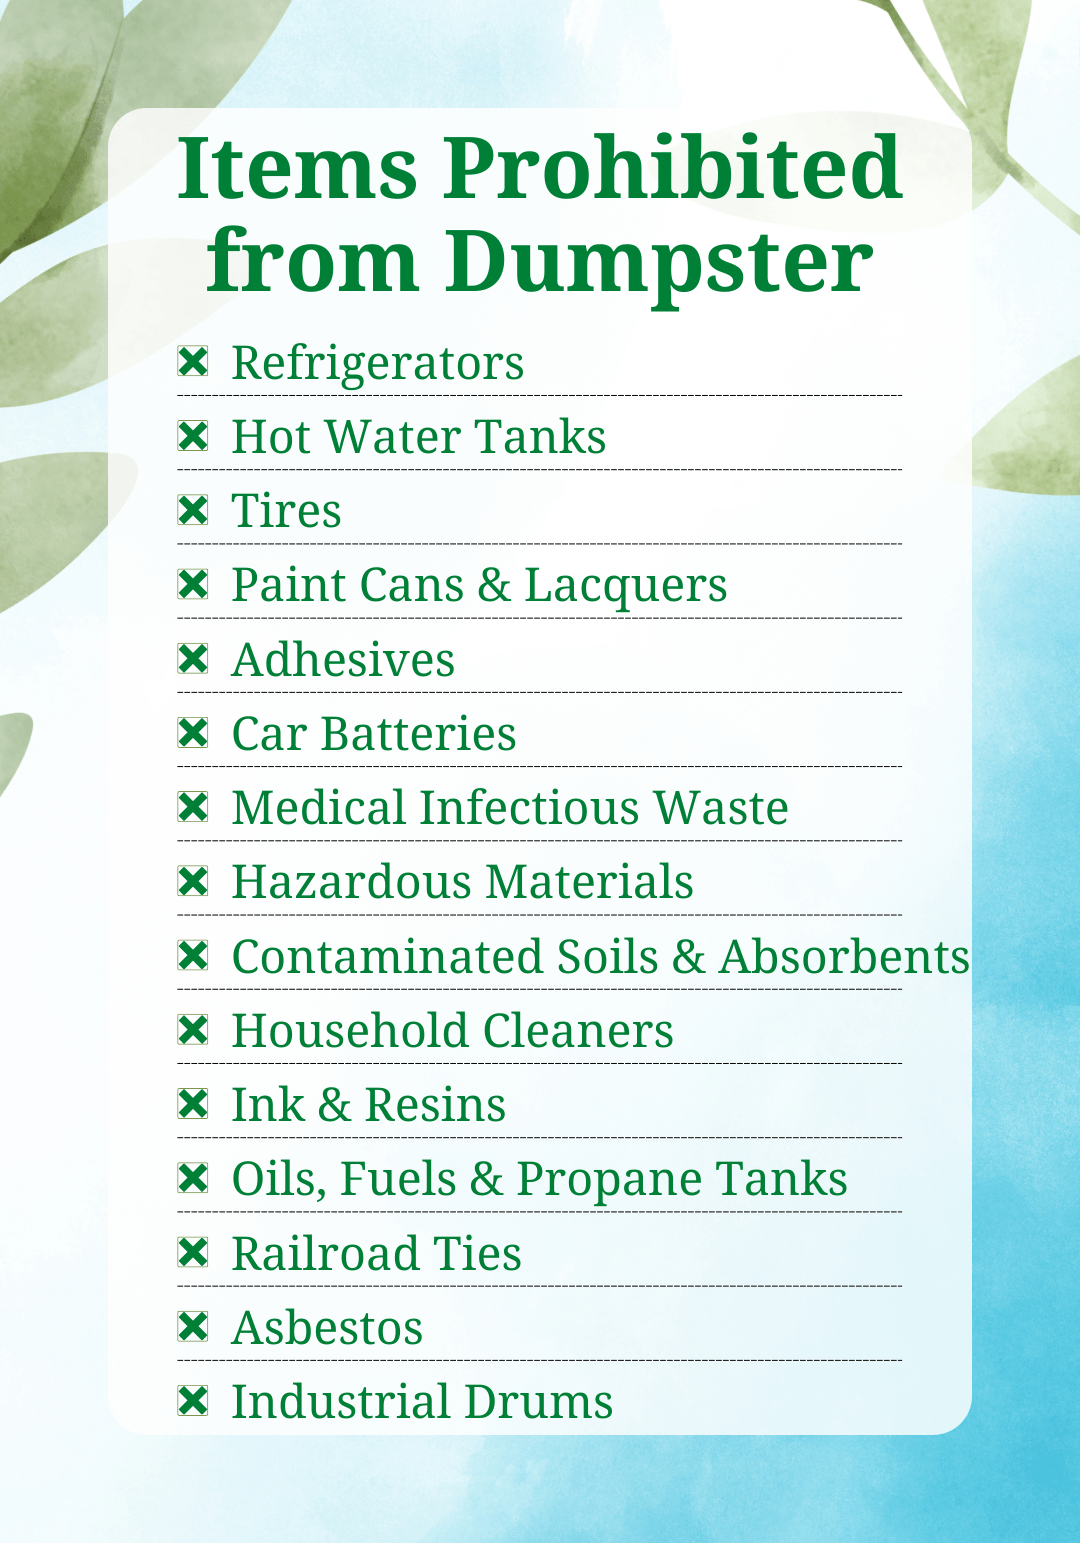 items prohibited from dumpsters infographic